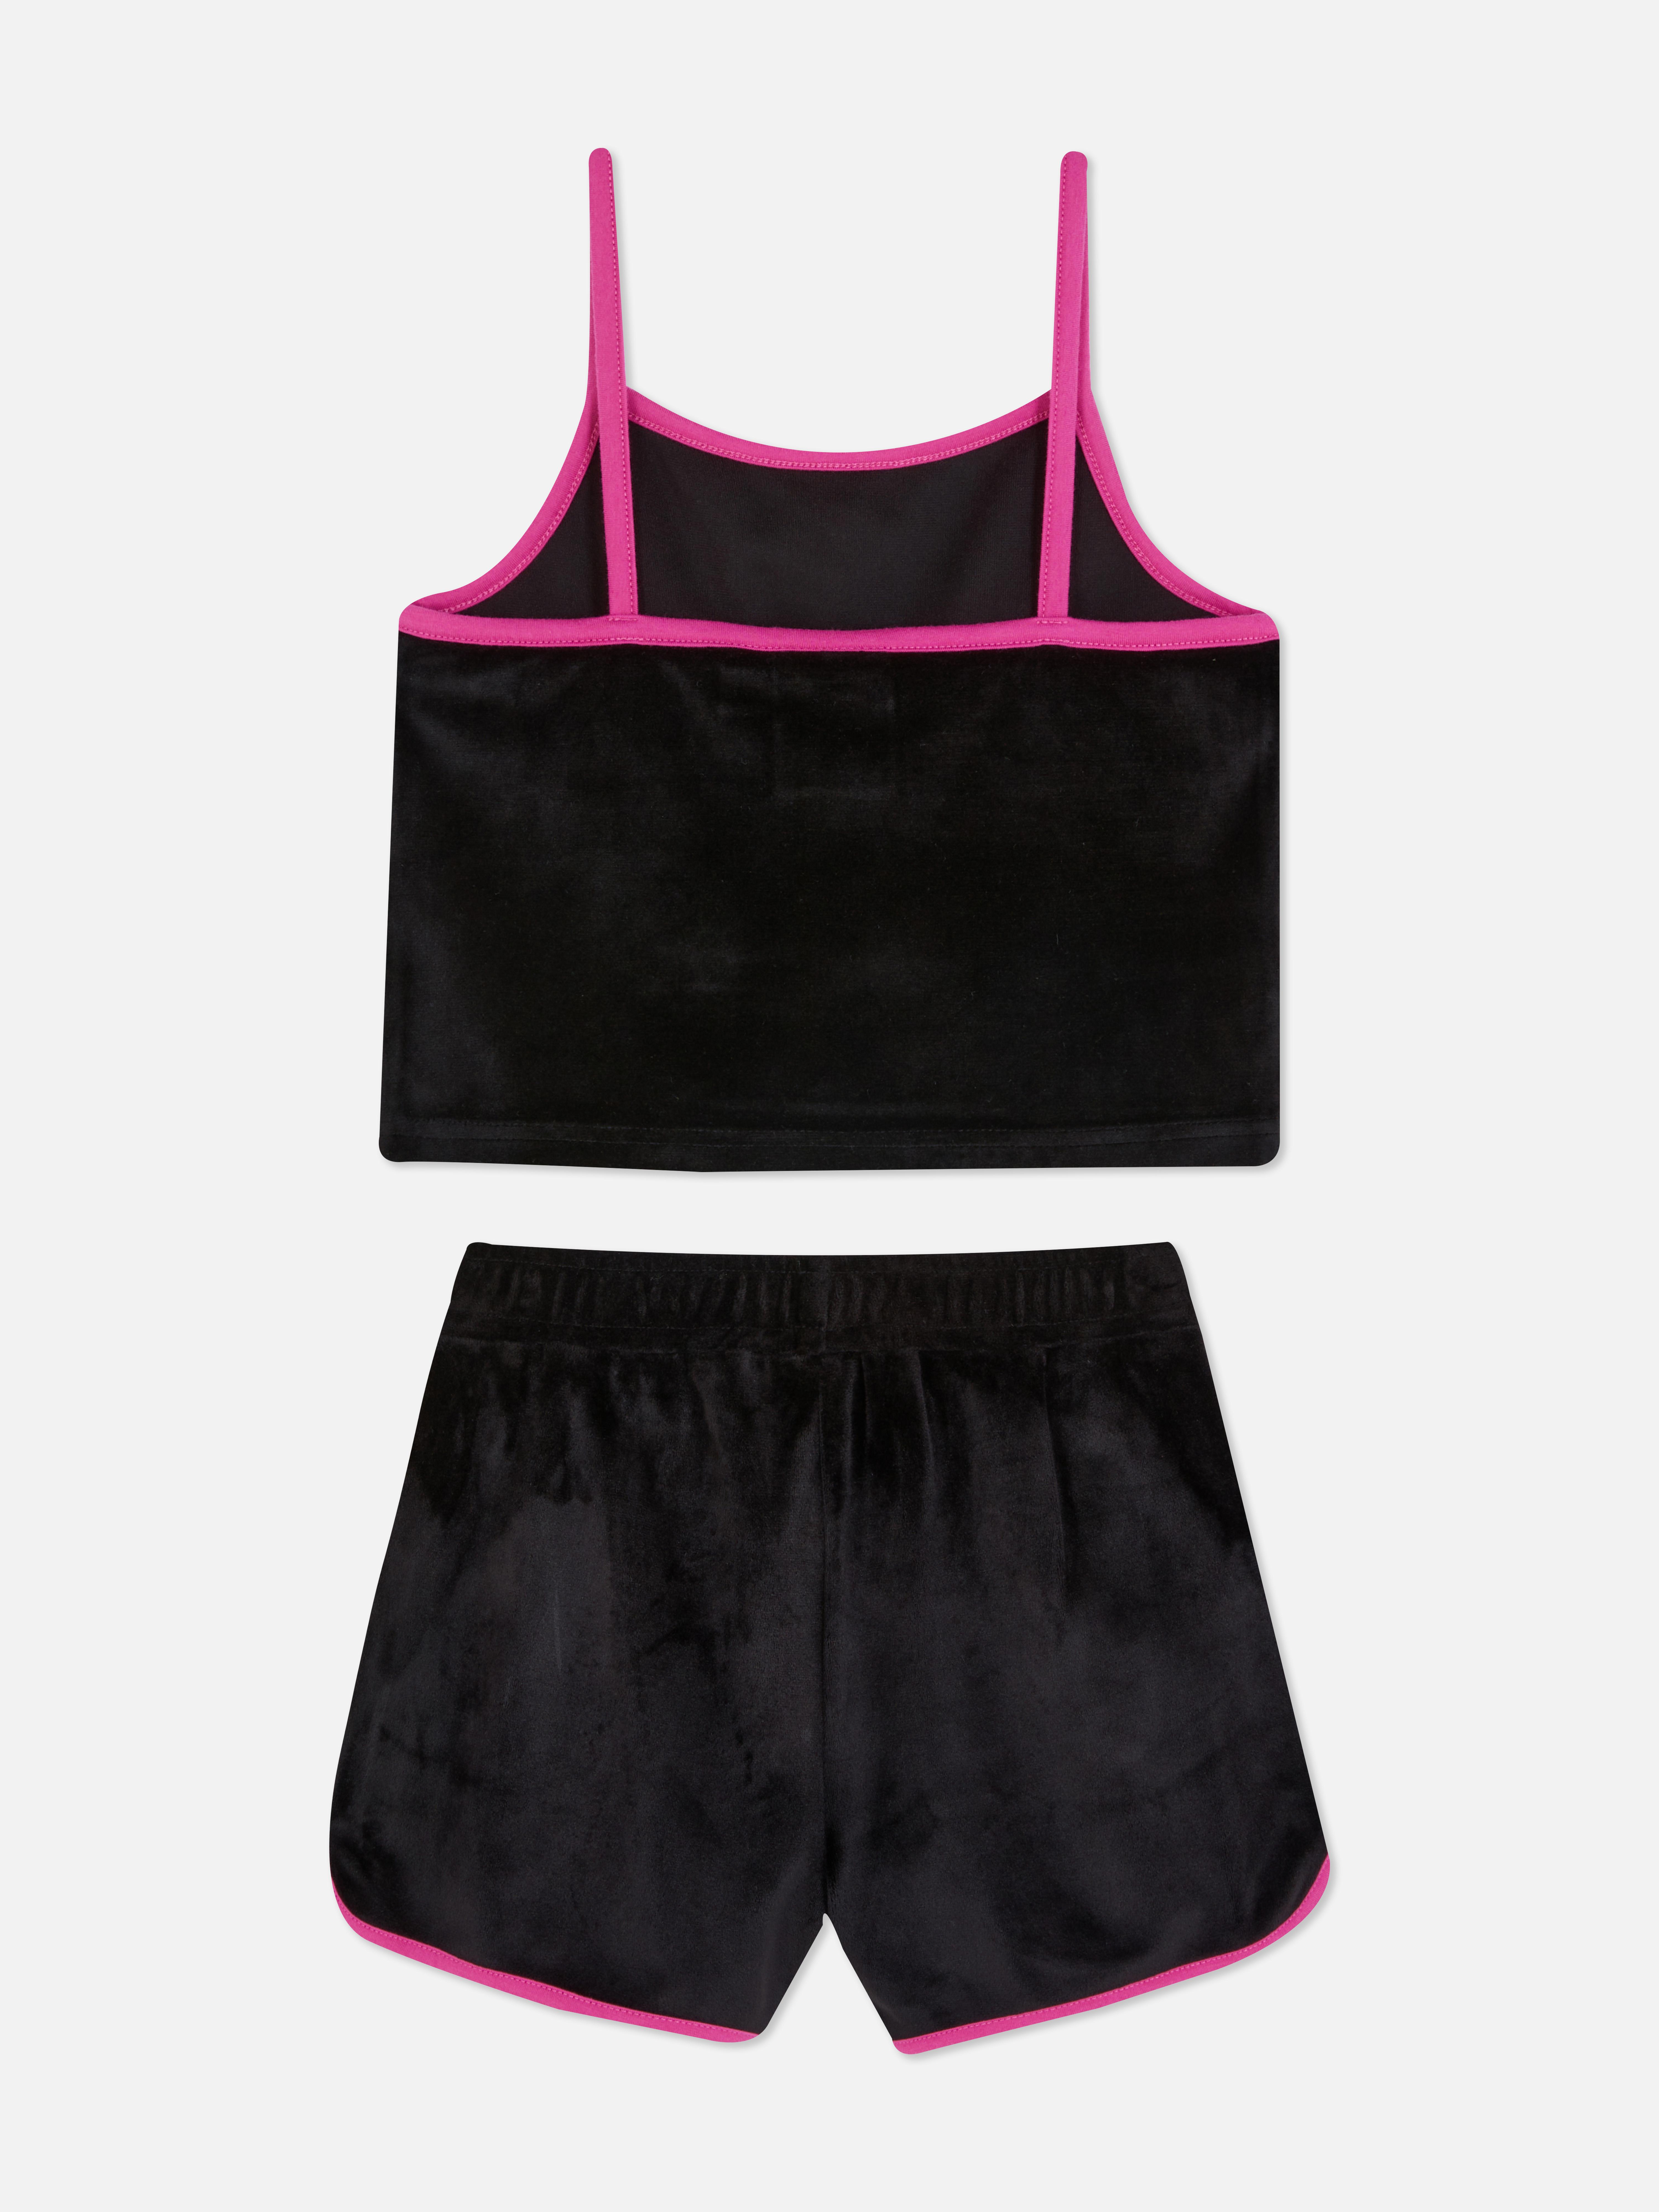 Pineapple Dance Studios Velour Top and Shorts Co-ord Set